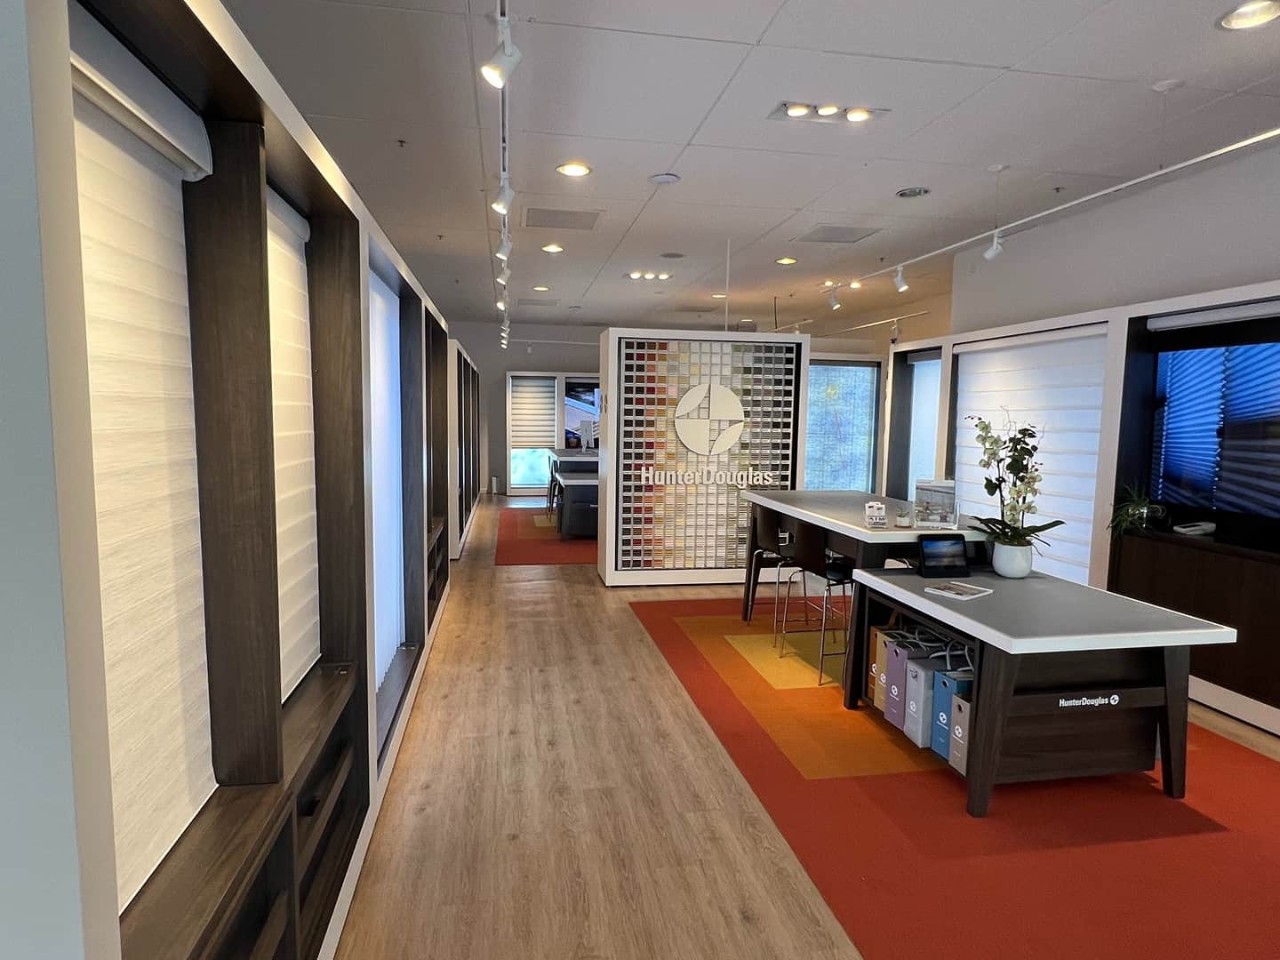 Inside the Store View of Rebarts Interiors' Hunter Douglas Gallery® on Burlingame Ave.